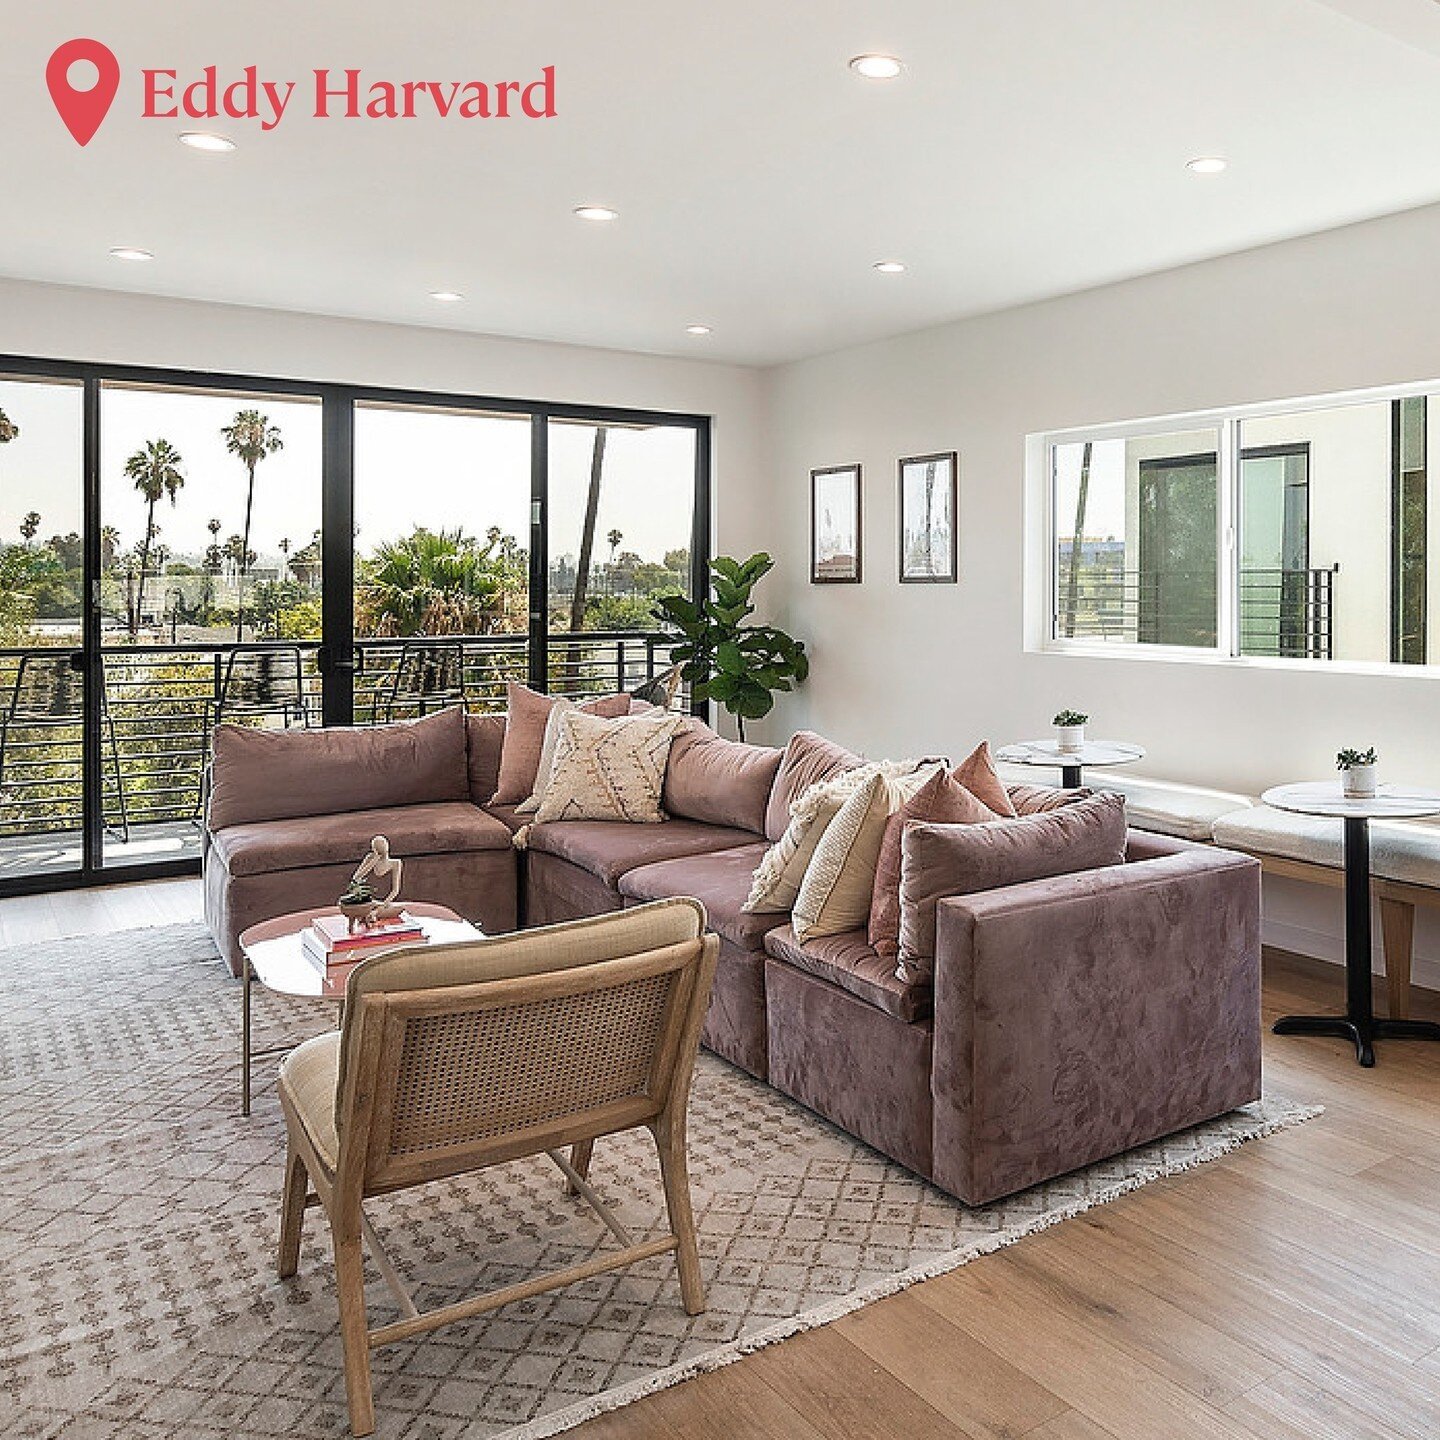 Imagine kicking back and relaxing on this couch after a long day... 🤤⁠
⁠
#eddycoliving #losangeles #colivingspaces